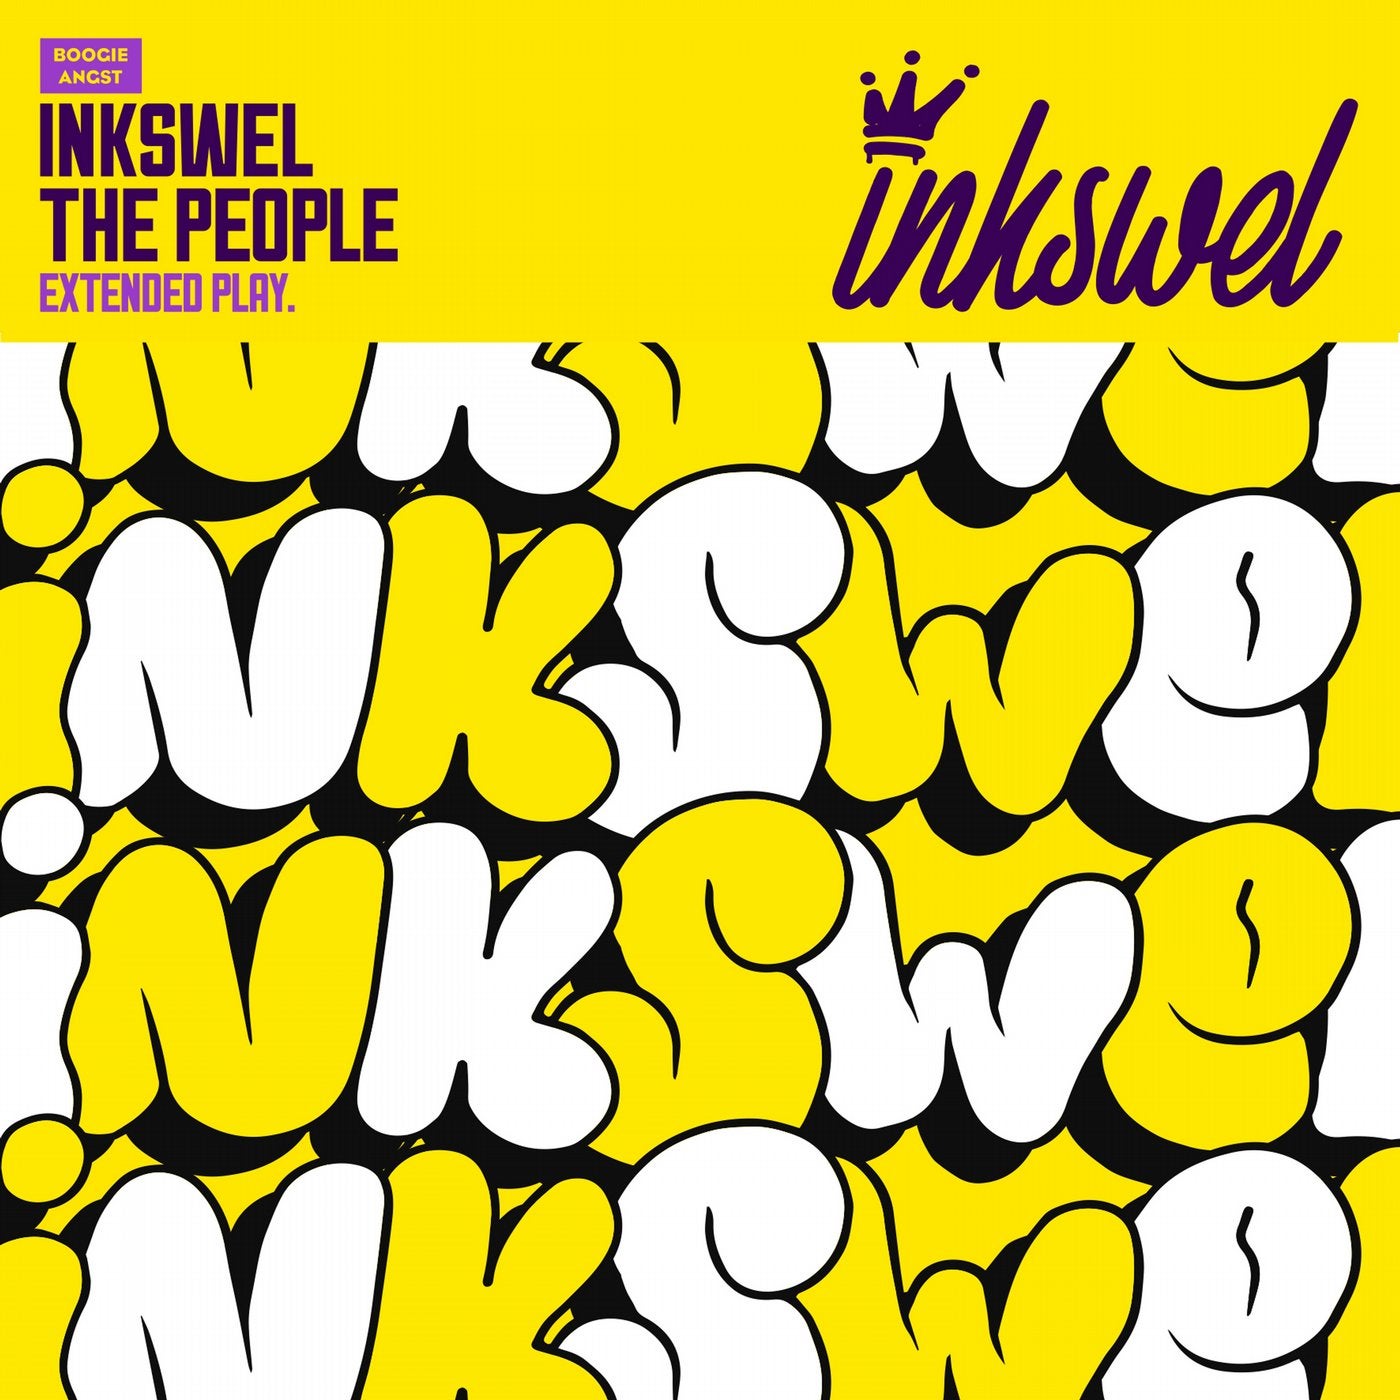 The People EP